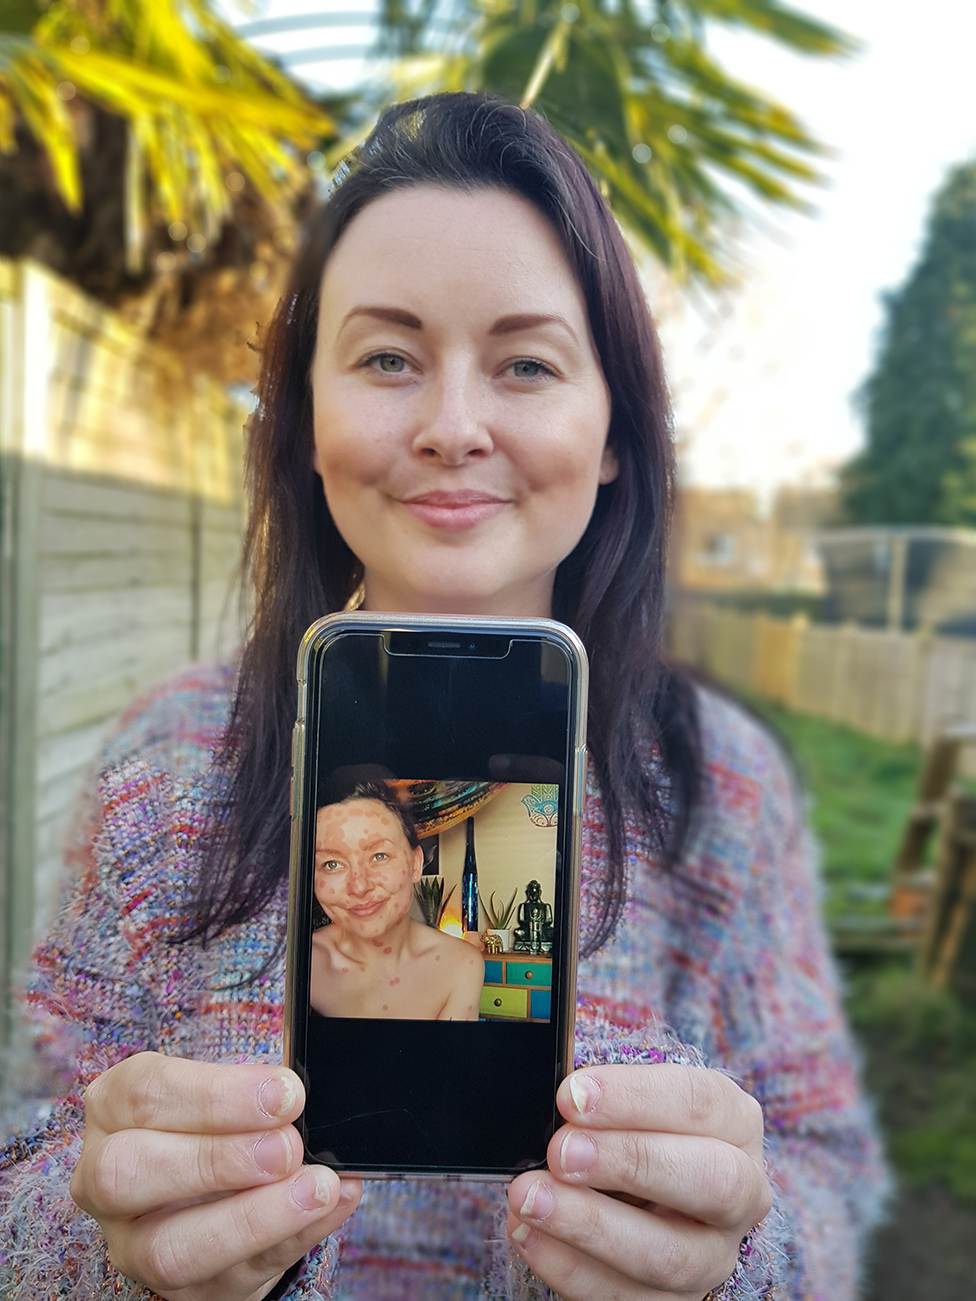 Aimee shows a picture of her psoriasis